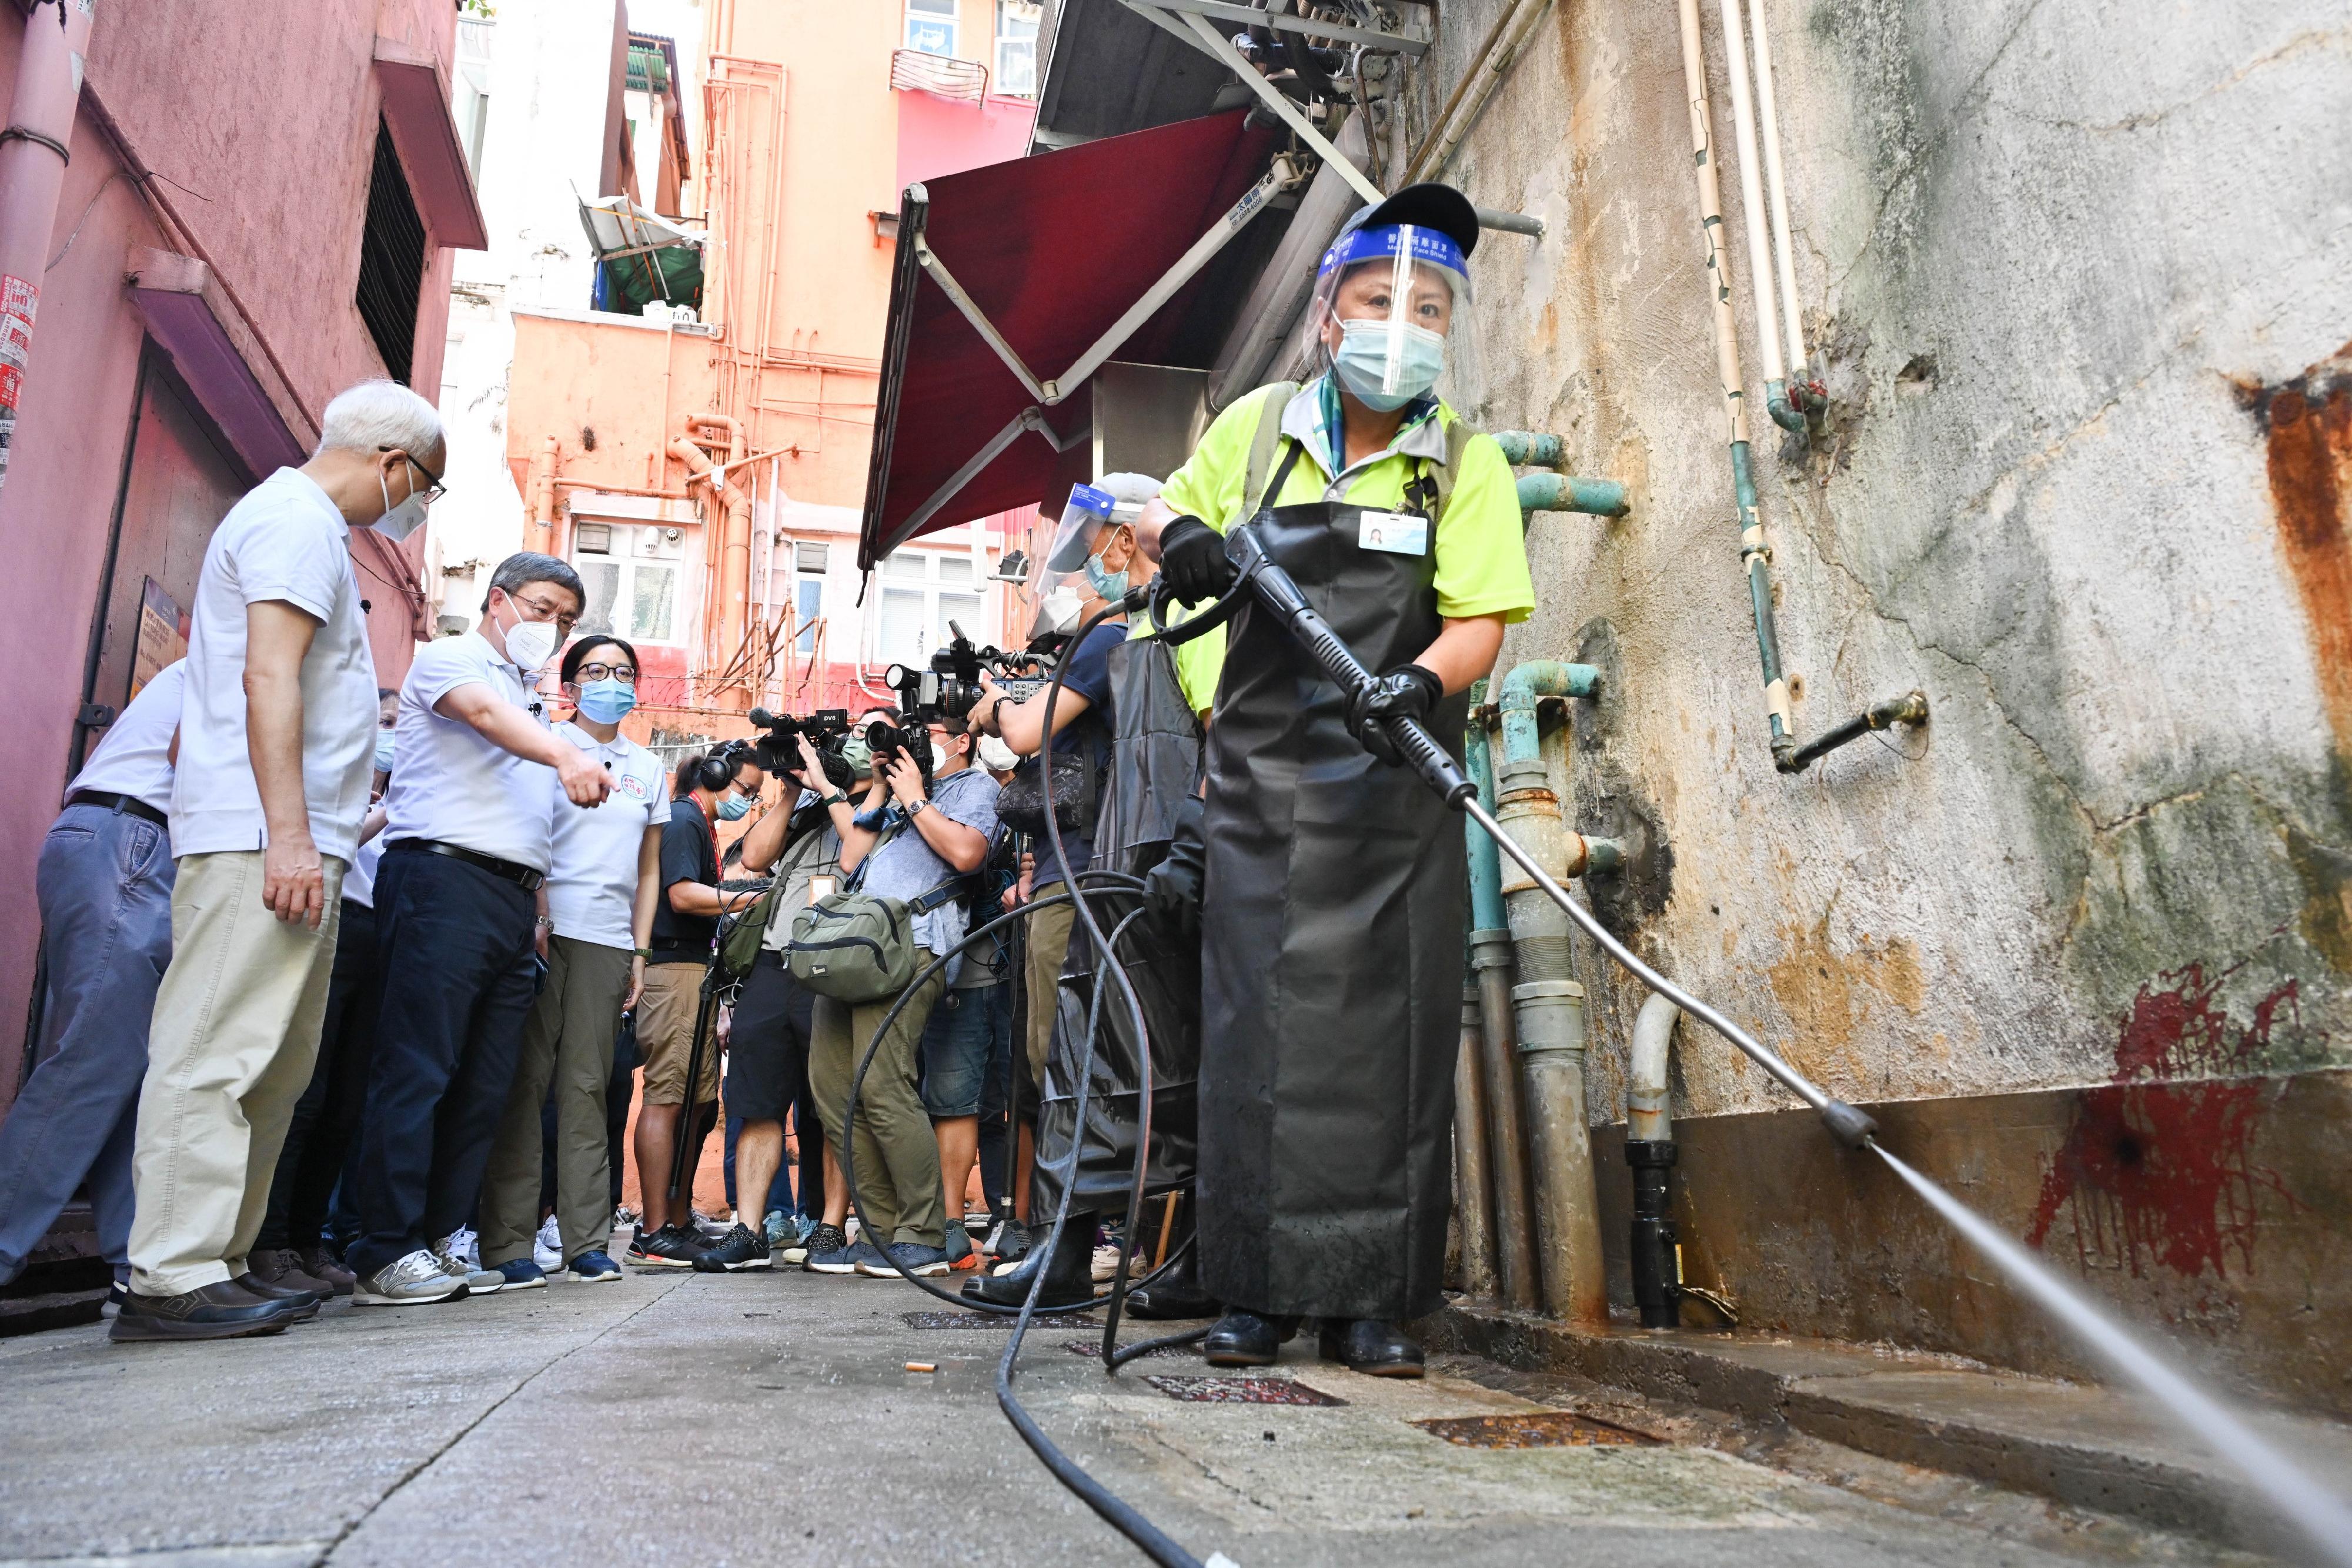 The Deputy Chief Secretary for Administration, Mr Cheuk Wing-hing, inspected hygiene black spot in Lai Chi Kok Road today (August 14). Photo shows Mr Cheuk (second left), looking on as staff members conduct street cleaning by high-pressure water jet at a hygiene black spot. Also present is the Secretary for Environment and Ecology, Mr Tse Chin-wan (first left).